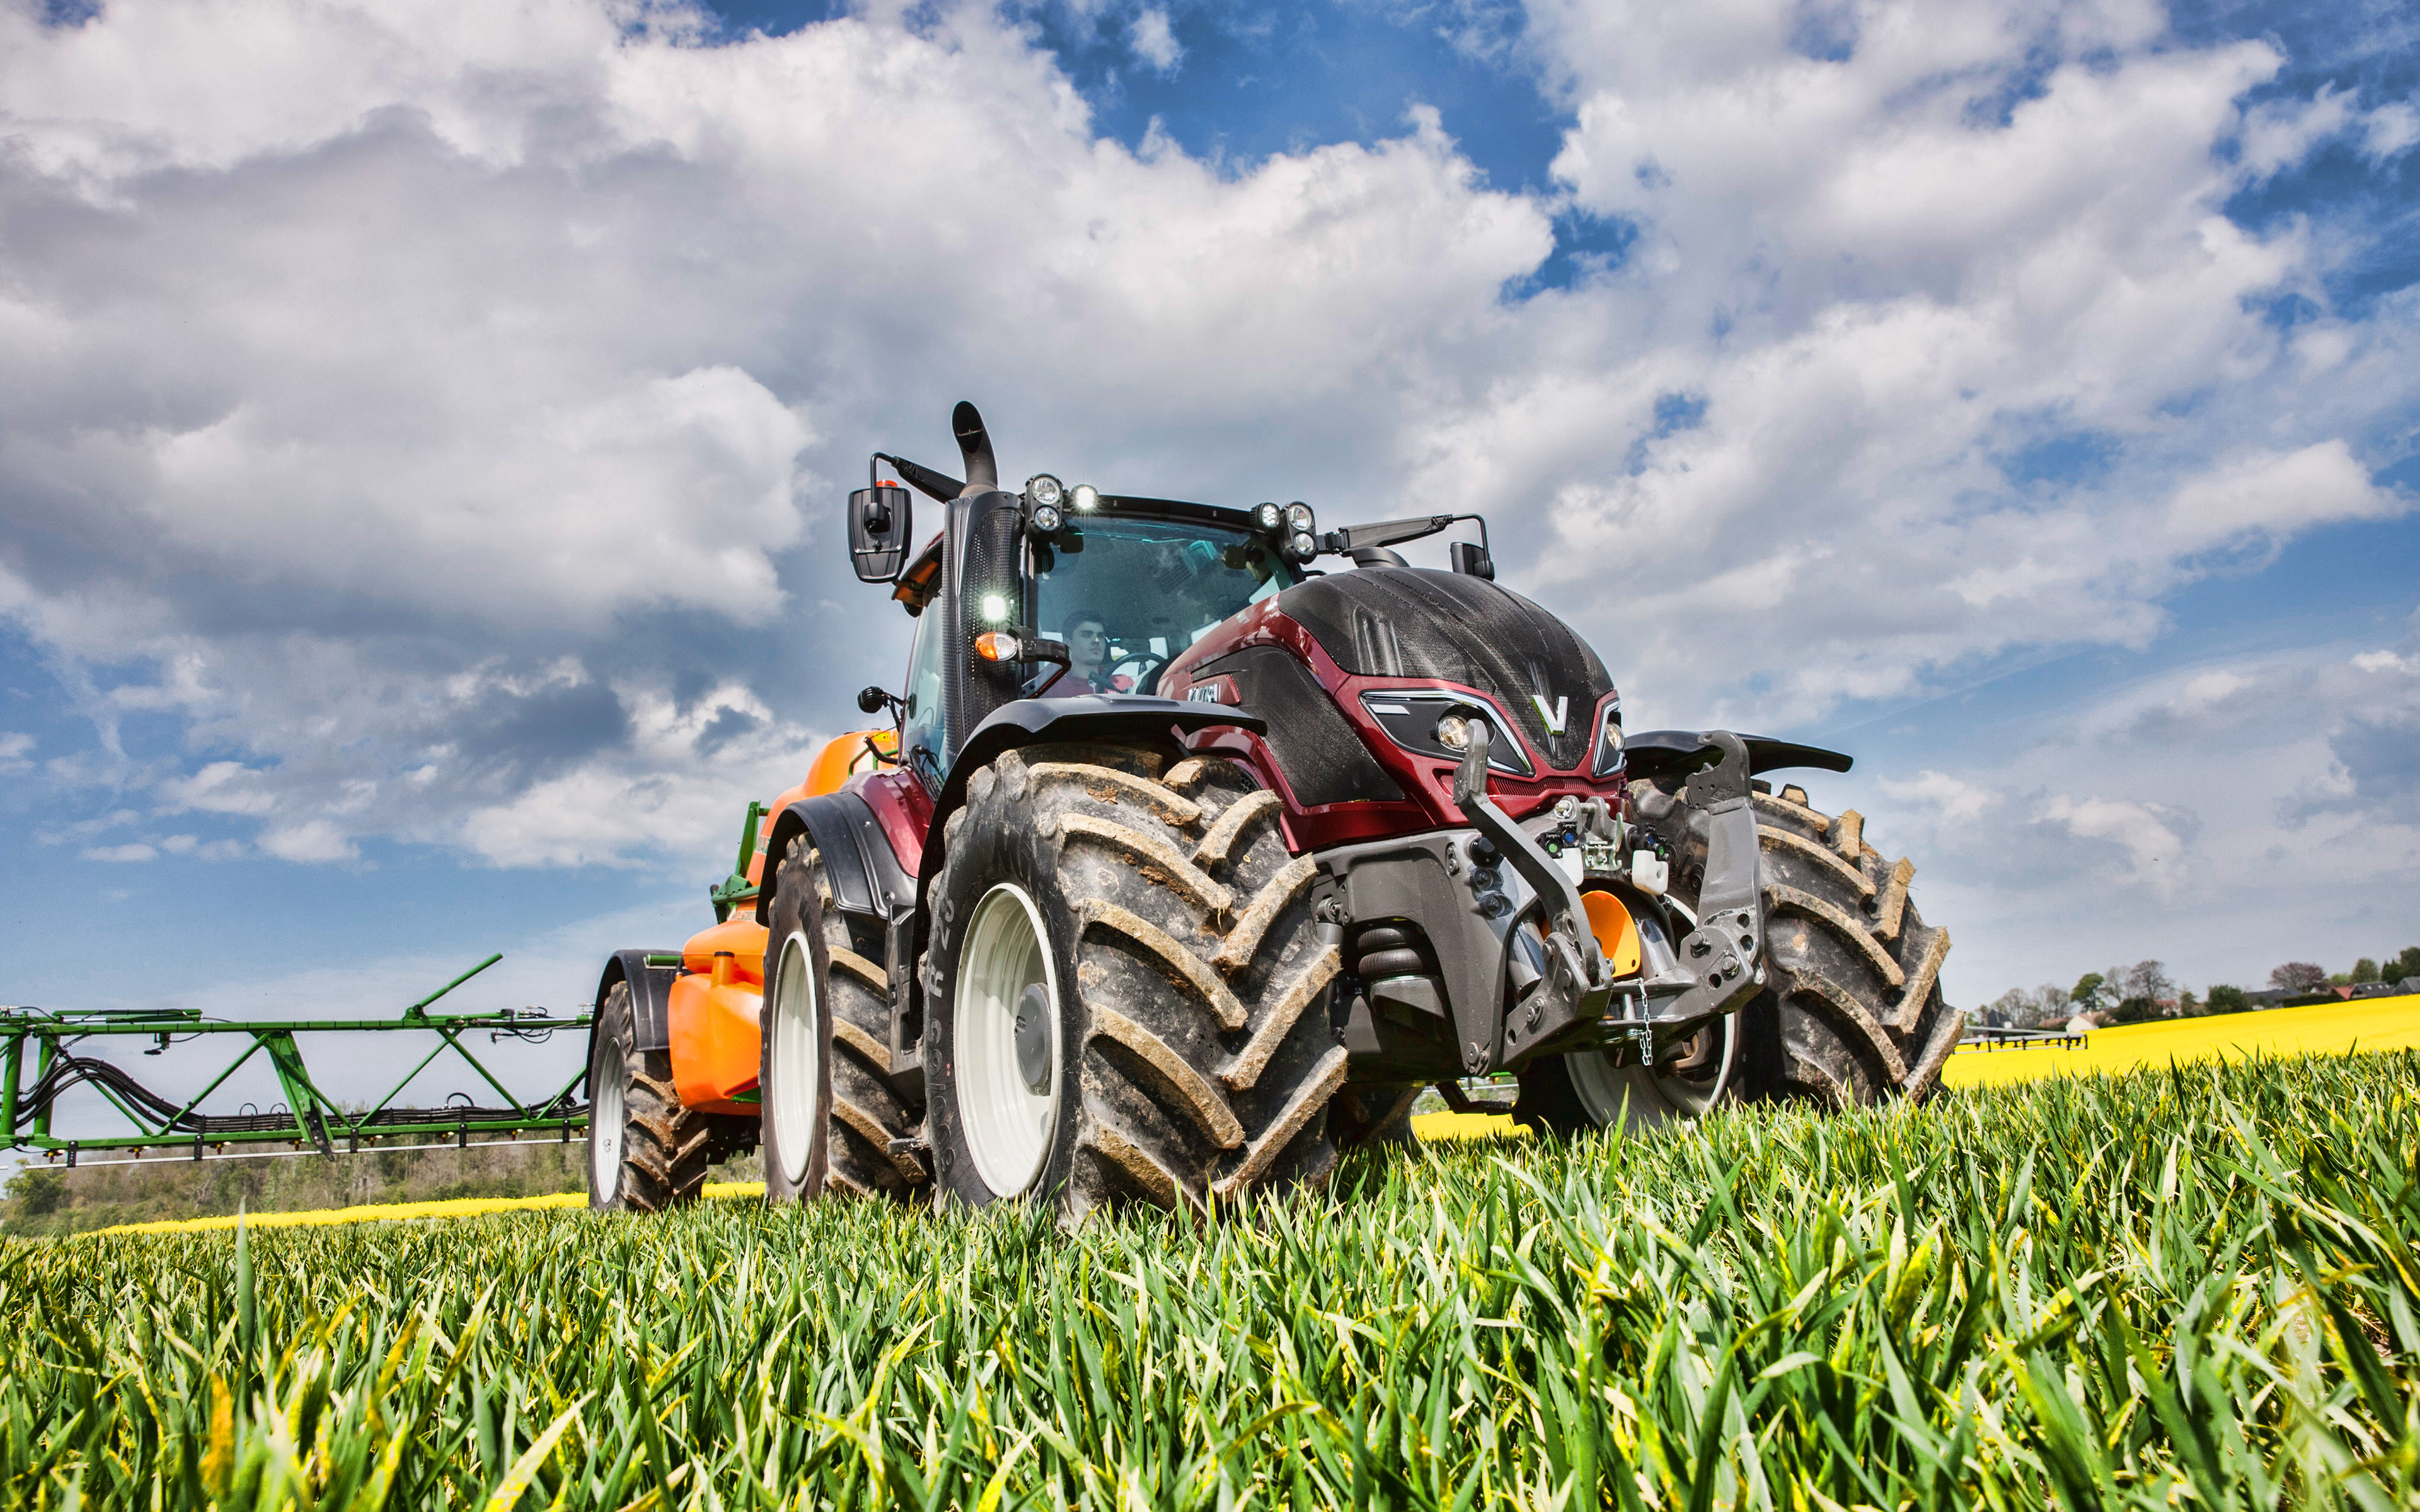 Download wallpaper VALTRA T234V, 4k, fertilizer fields, 2019 tractors, Valtra T Series, agricultural machinery, new T234V, HDR, agriculture, harvest, tractor in the field, Valtra for desktop with resolution 3840x2400. High Quality HD